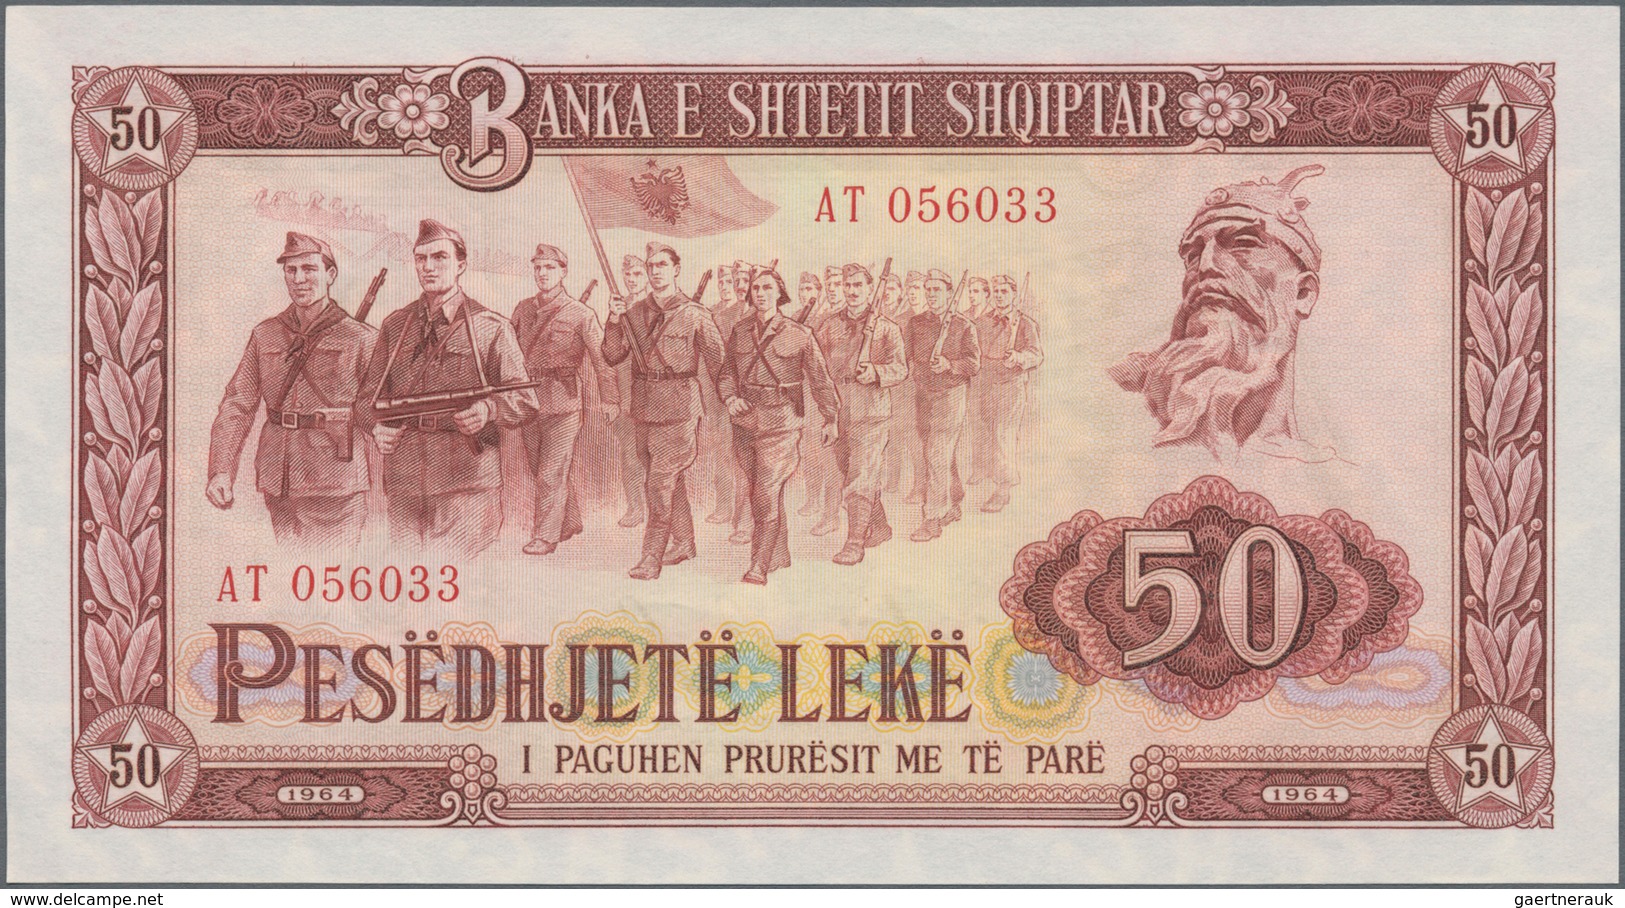 Albania / Albanien: Set with 15 banknotes of the 1964 and 1976 issue with 1, 3, 5, 10, 25, 50 and 10